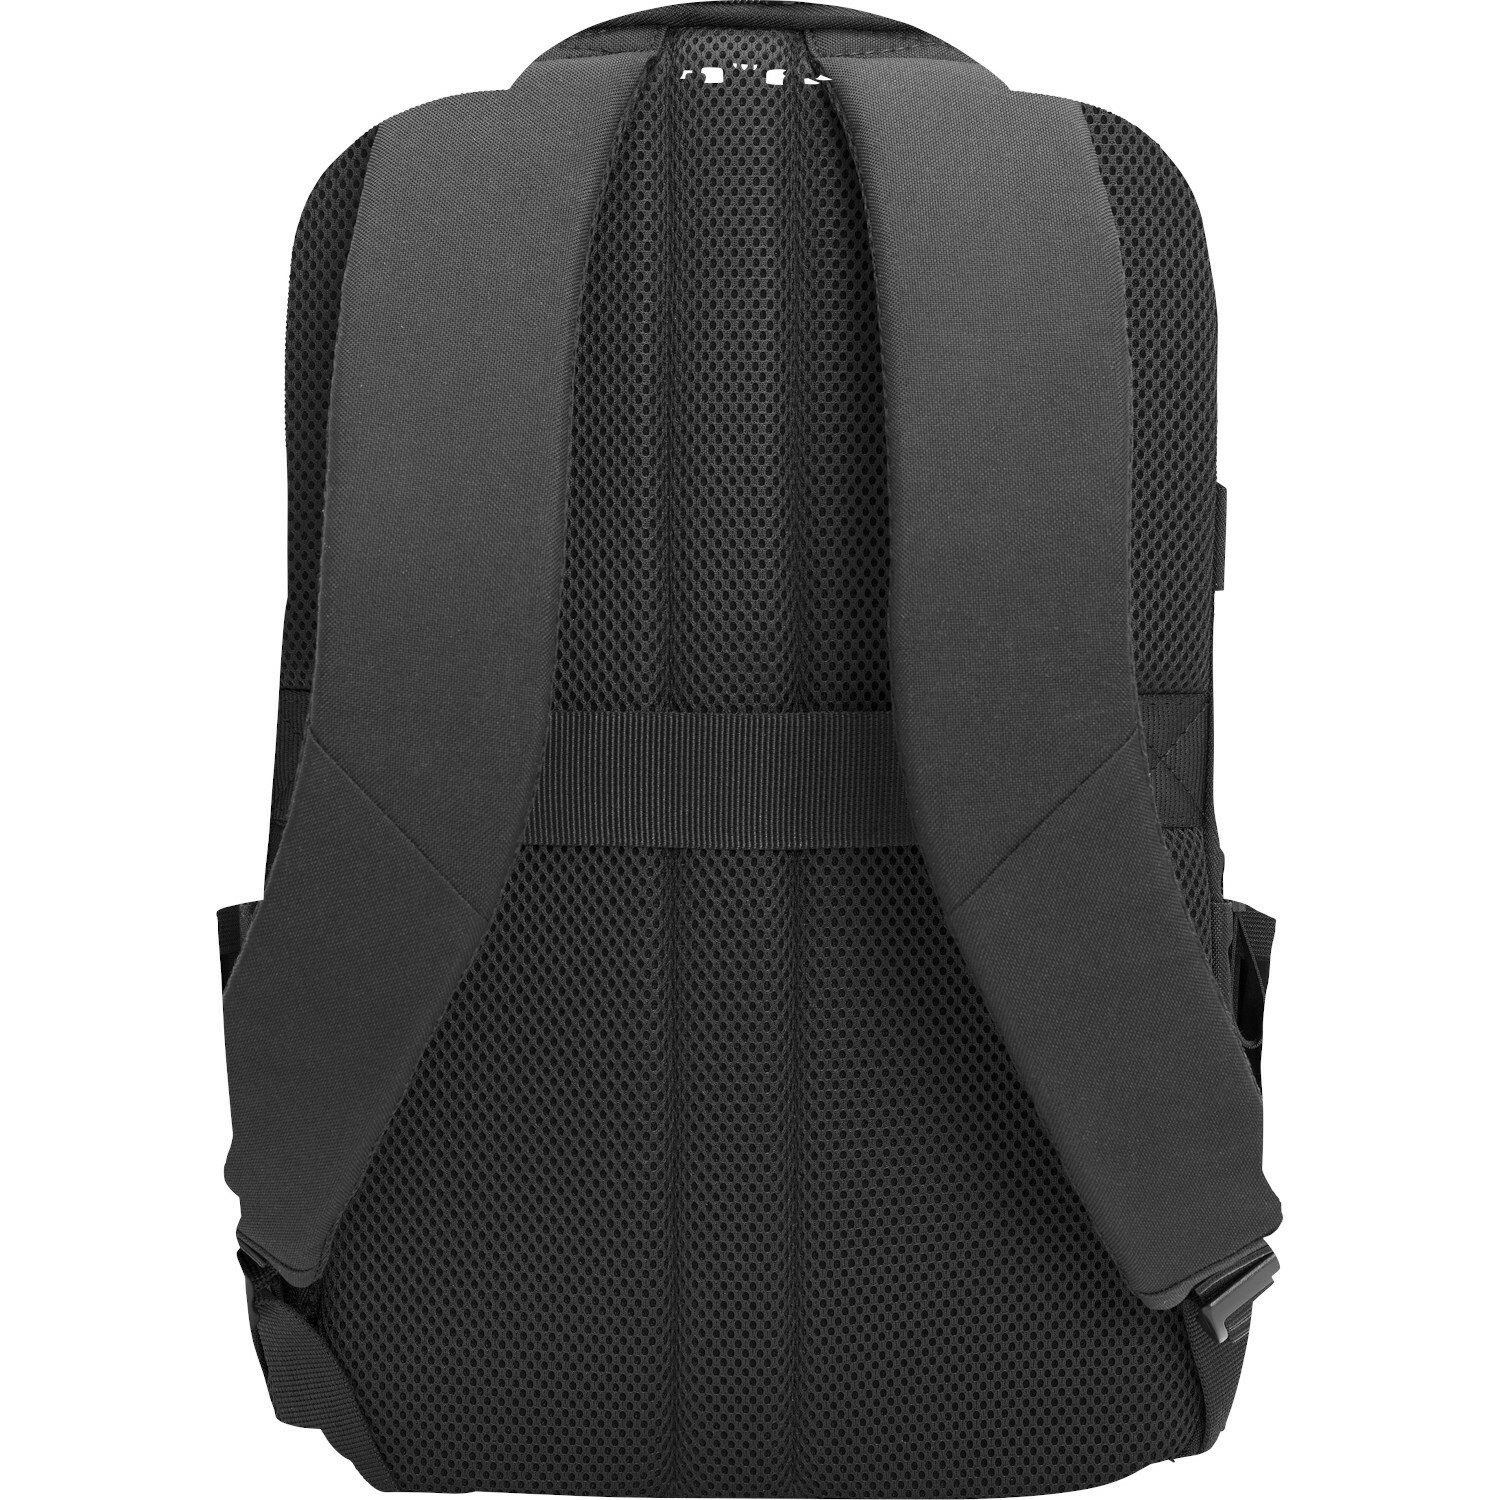 HP Renew Executive Carrying Case (Backpack) for 33 cm (13") to 40.9 cm (16.1") HP Notebook - Black